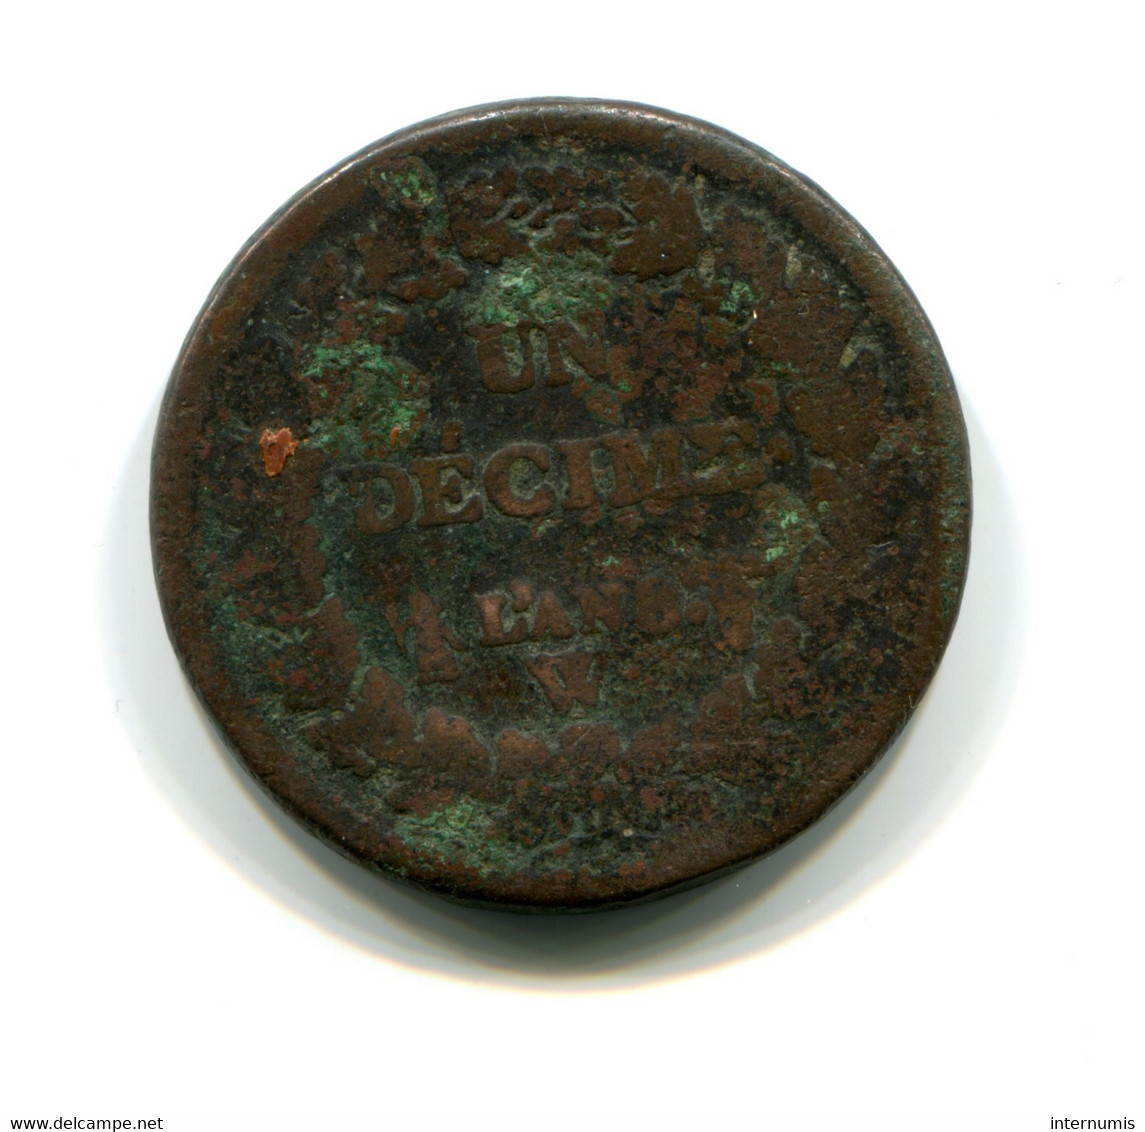 France 1 Decime An 8 - W Dupre Cuivre (Copper) Lille B (F) KM#644, G.187a, F.129/52 - 1795-1799 French Directory